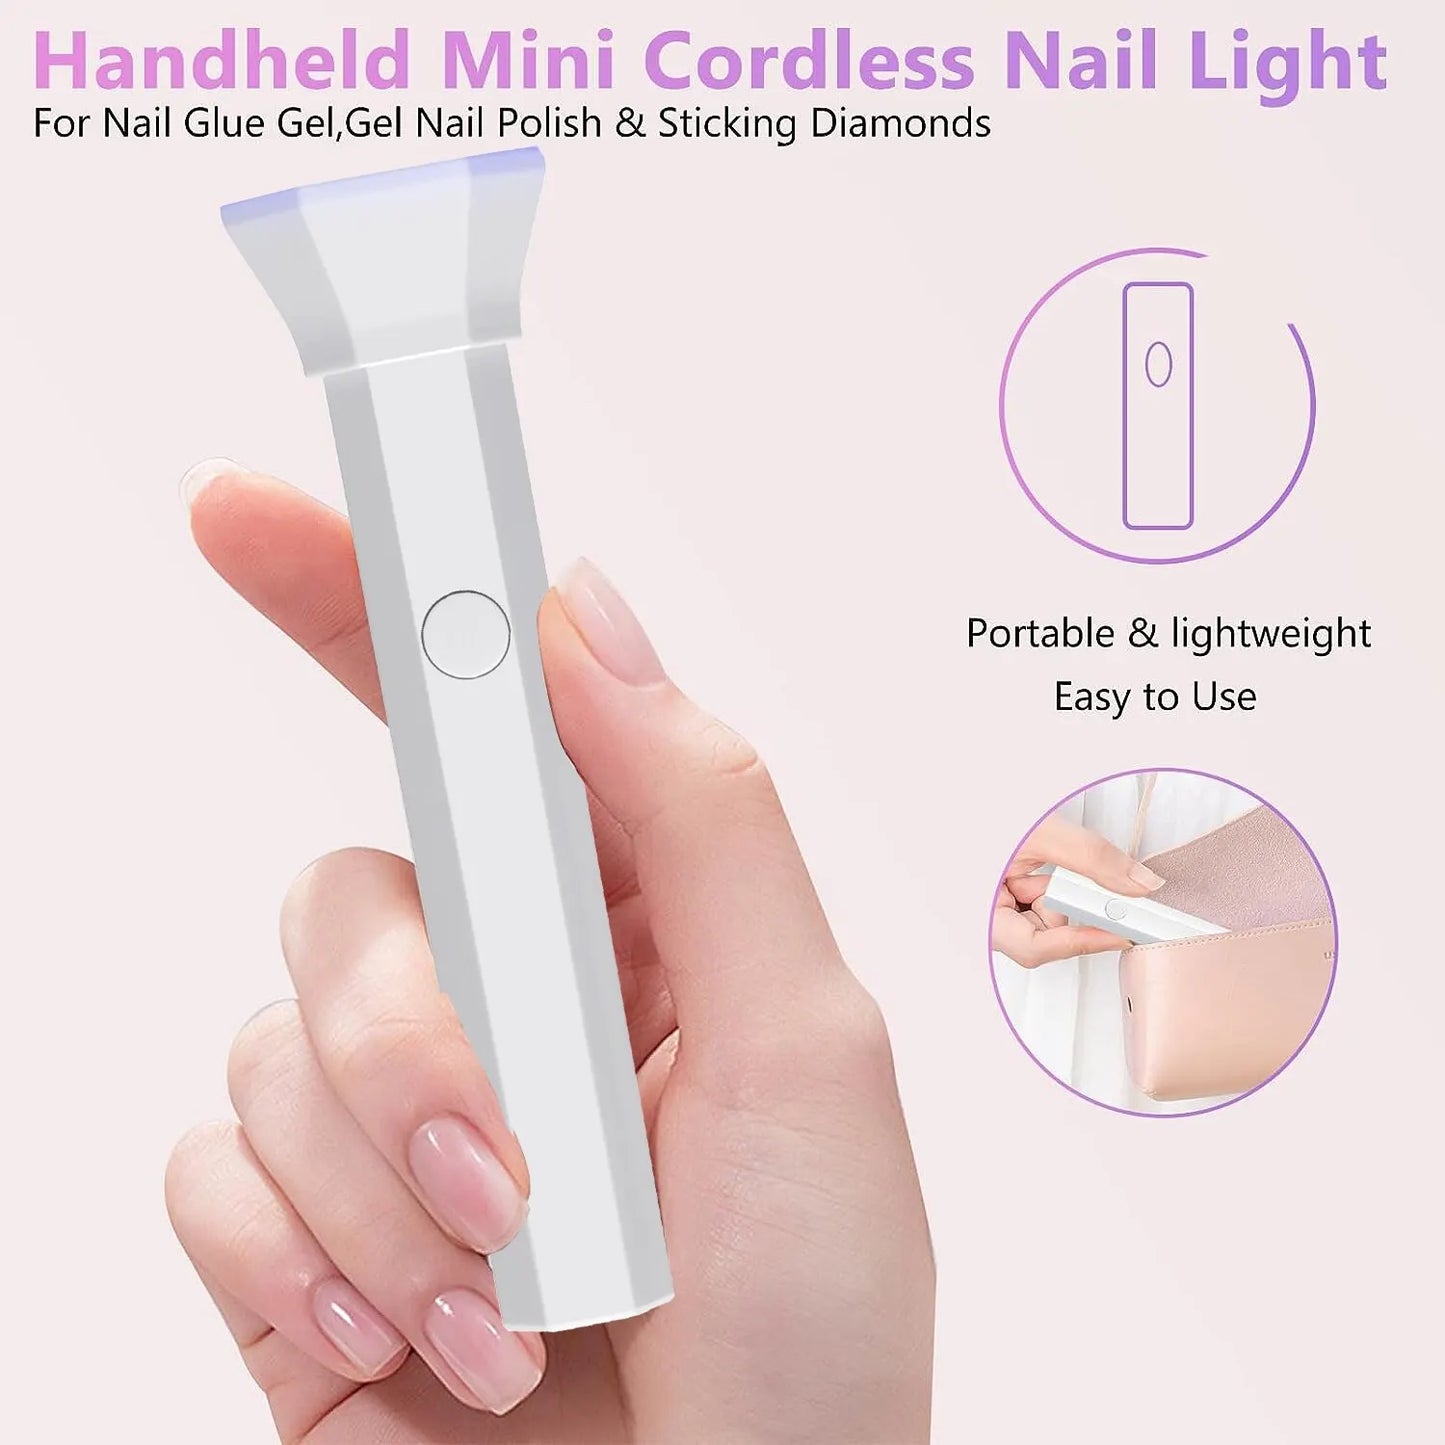 Portable Nail Dryer Lamp - UV LED Nail Light for Curing All Gel Polish - USB Rechargeable Quick Dry Manicure Machine - Nail Art Tools